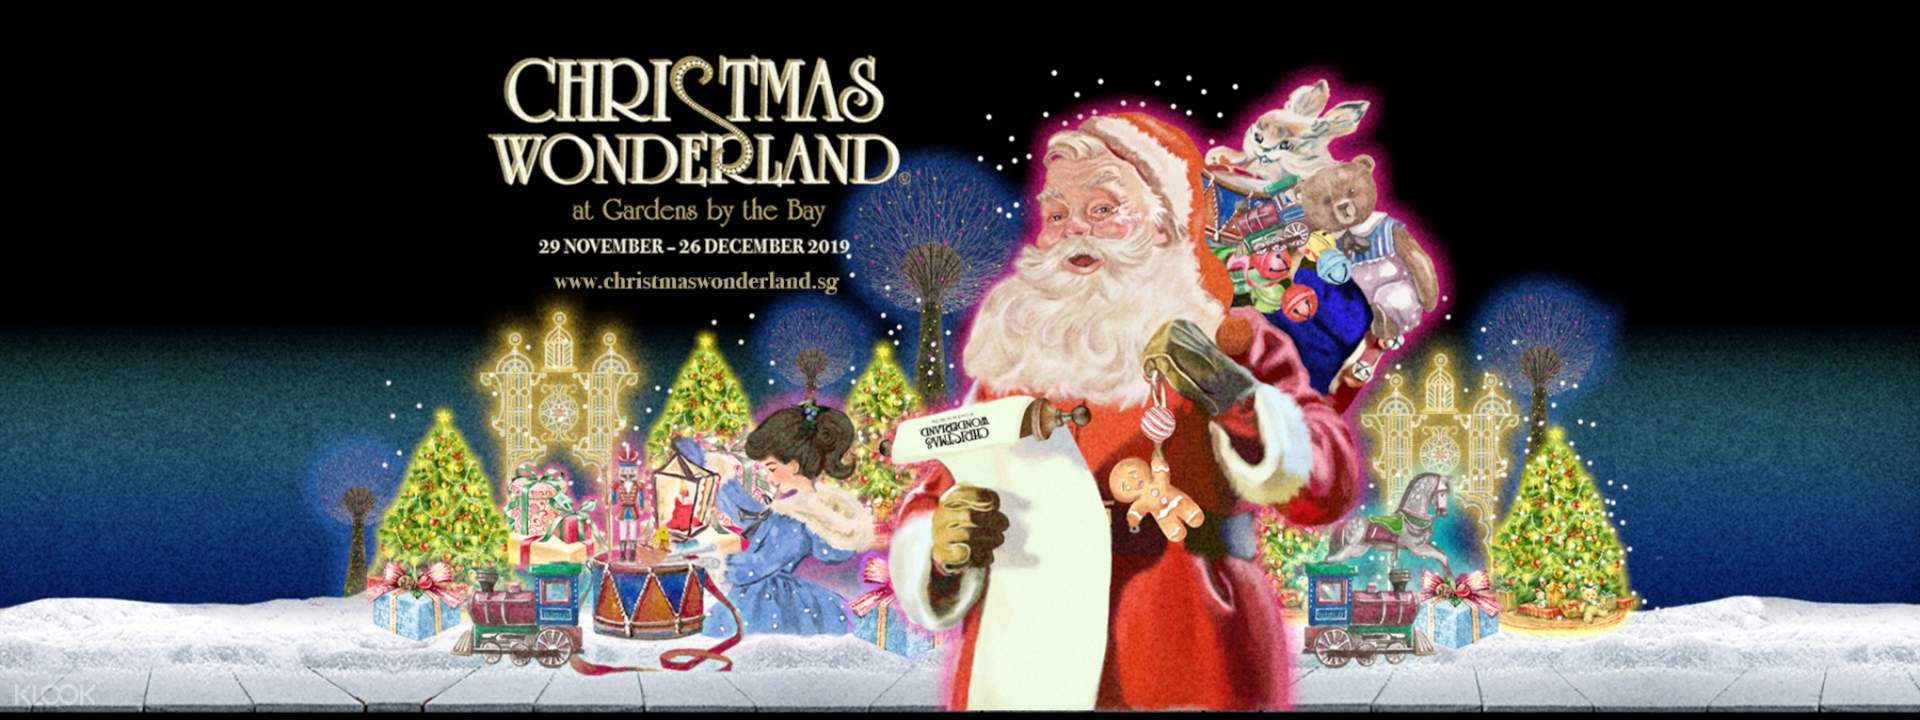 Christmas Wonderland at Gardens by the Bay Ticket - Klook Singapore